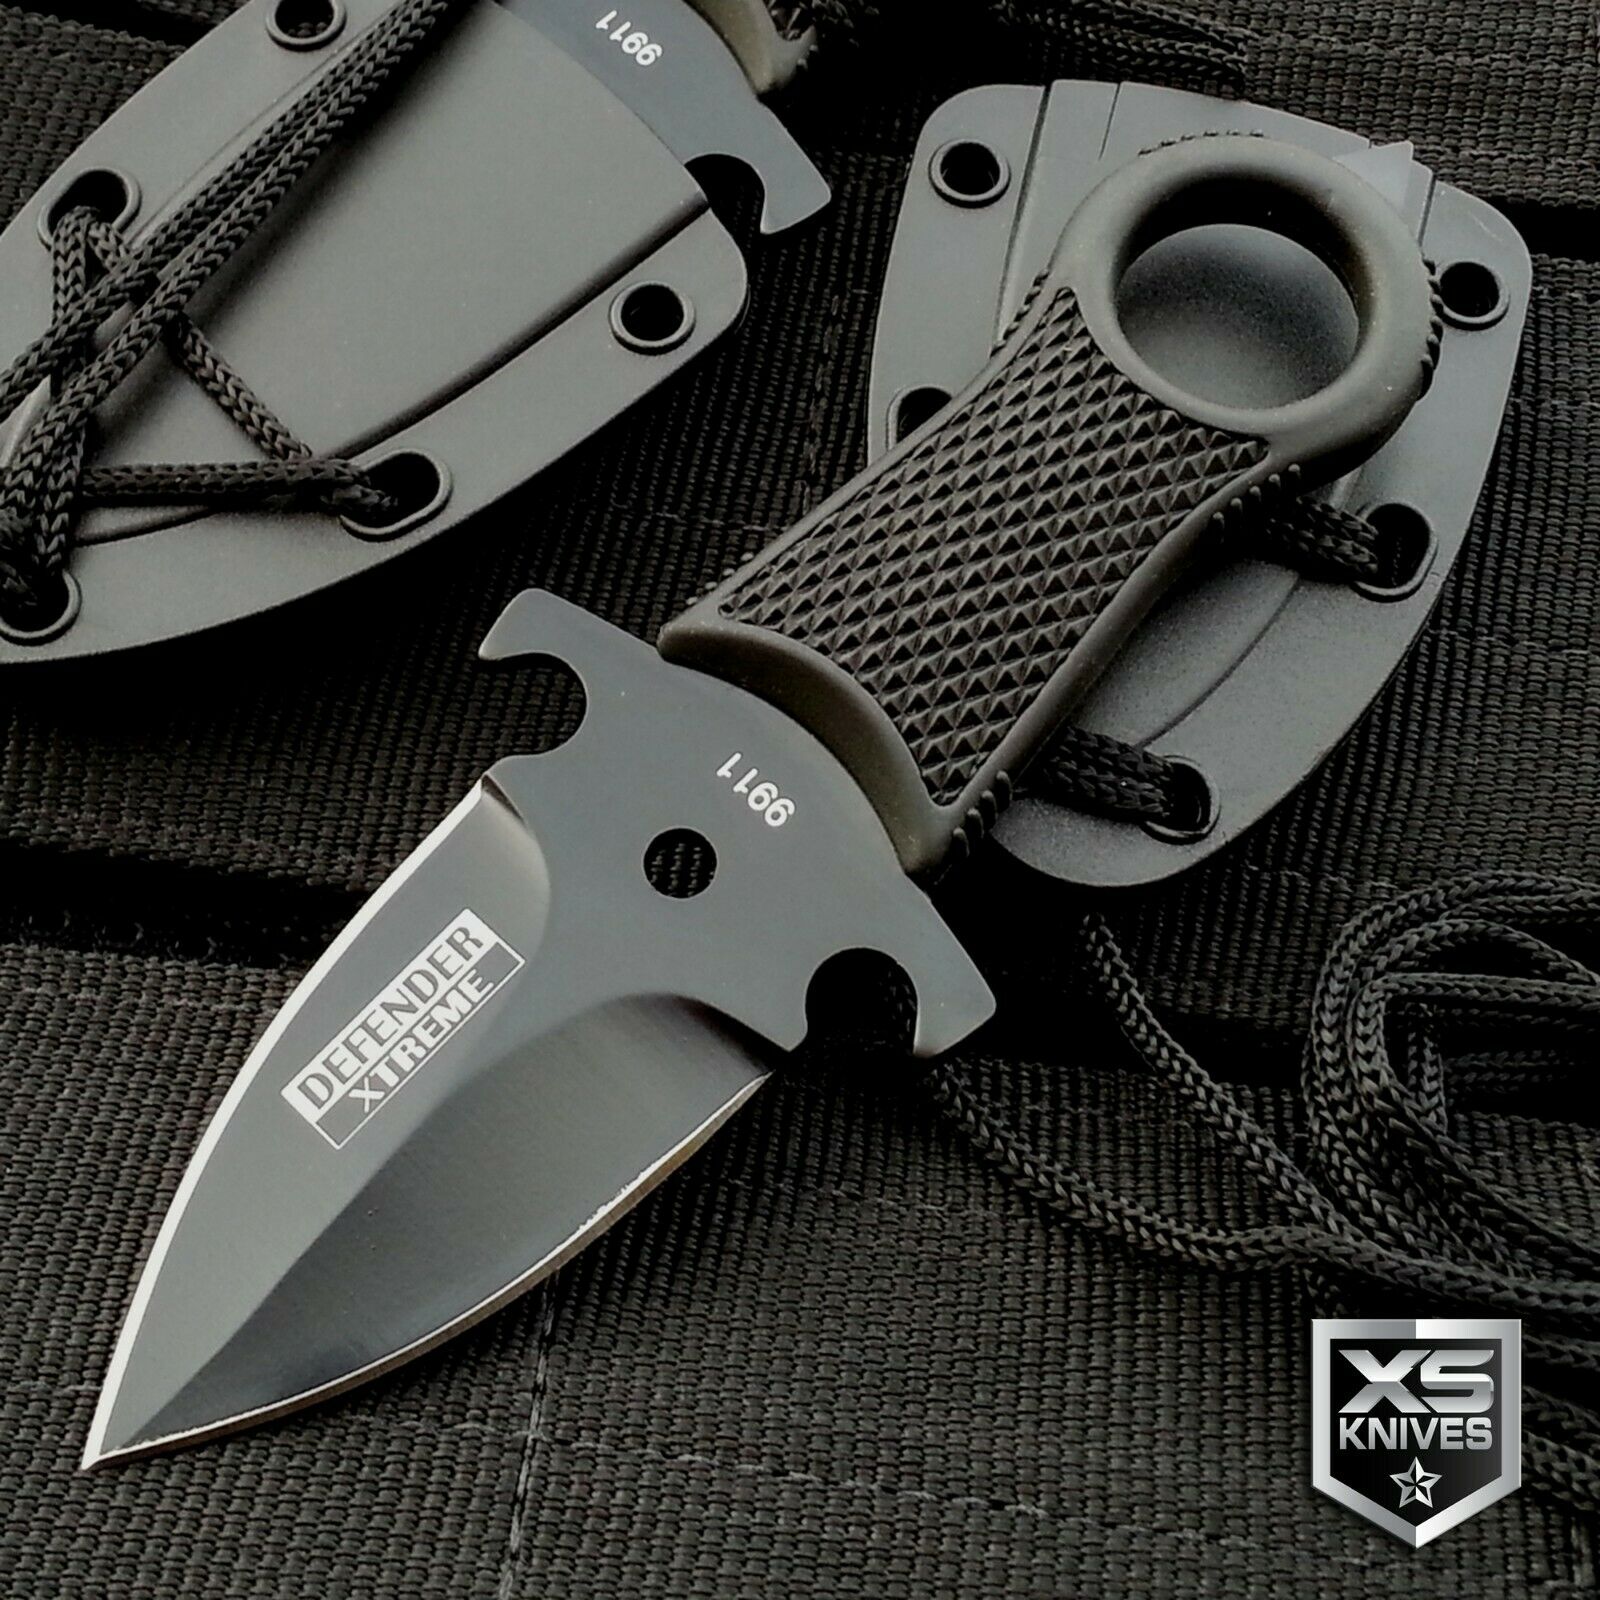 5" Full Tang Survival Black Tactical Hunting Fixed Blade Neck Knife + Sheath